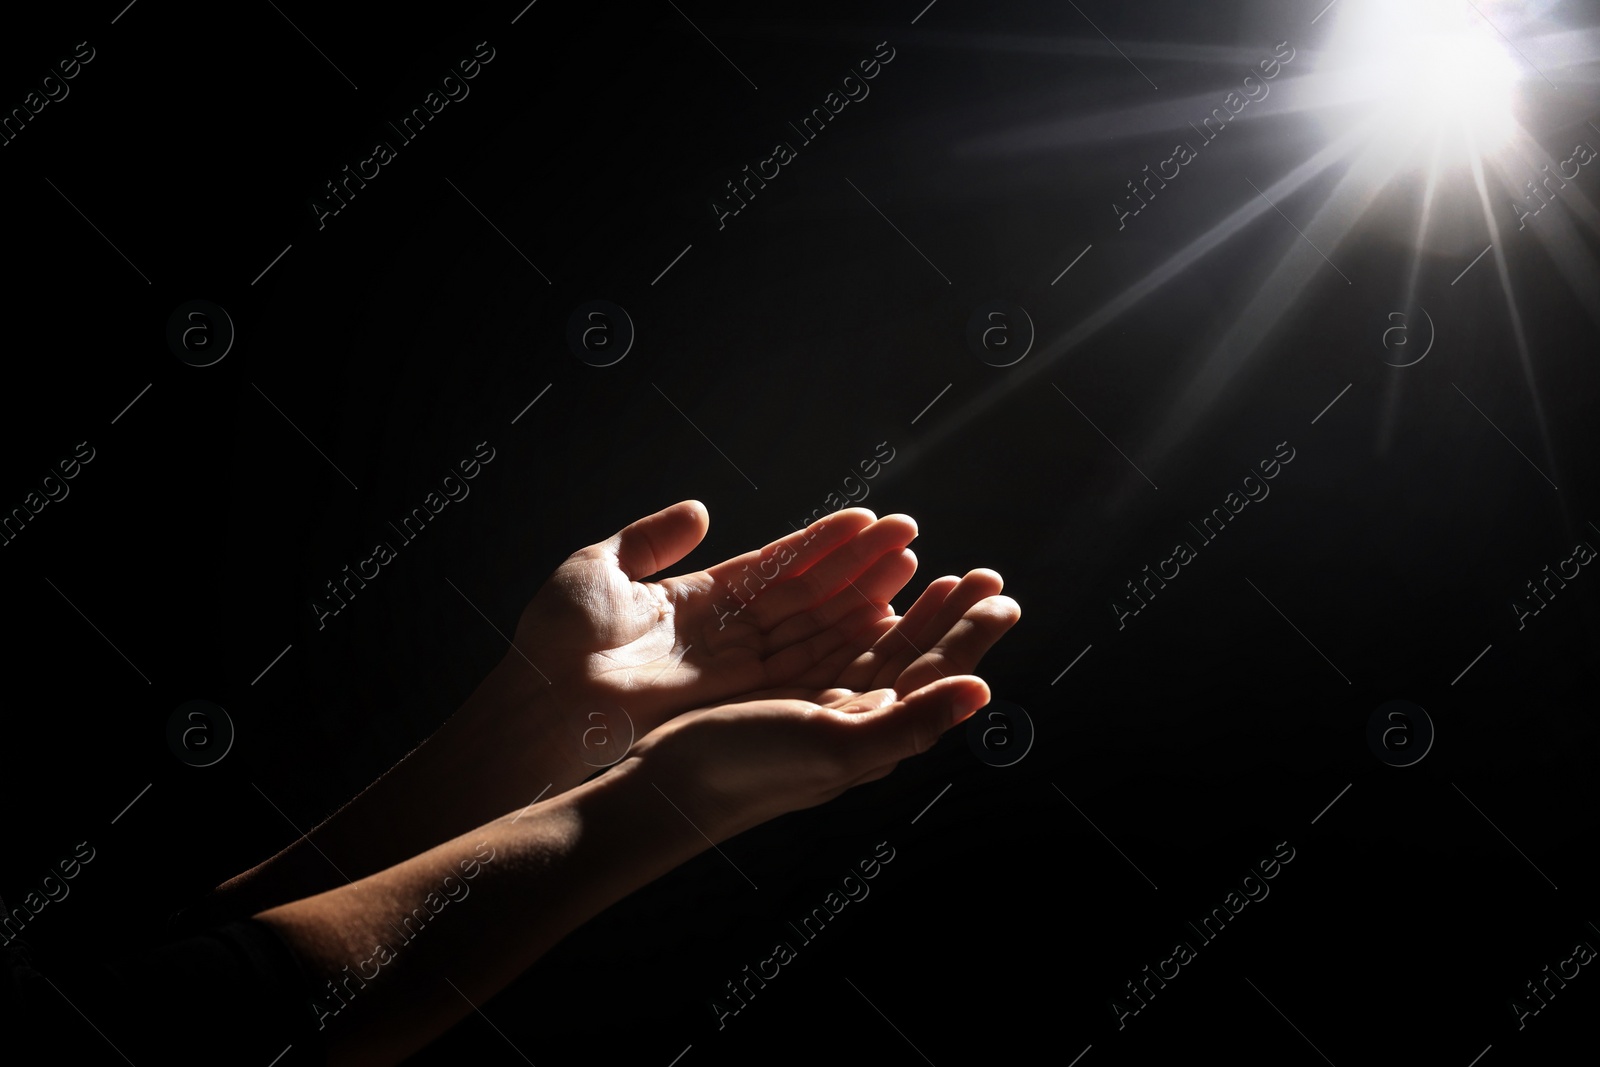 Image of Christian woman stretching hands towards holy light in darkness, closeup. Prayer and belief